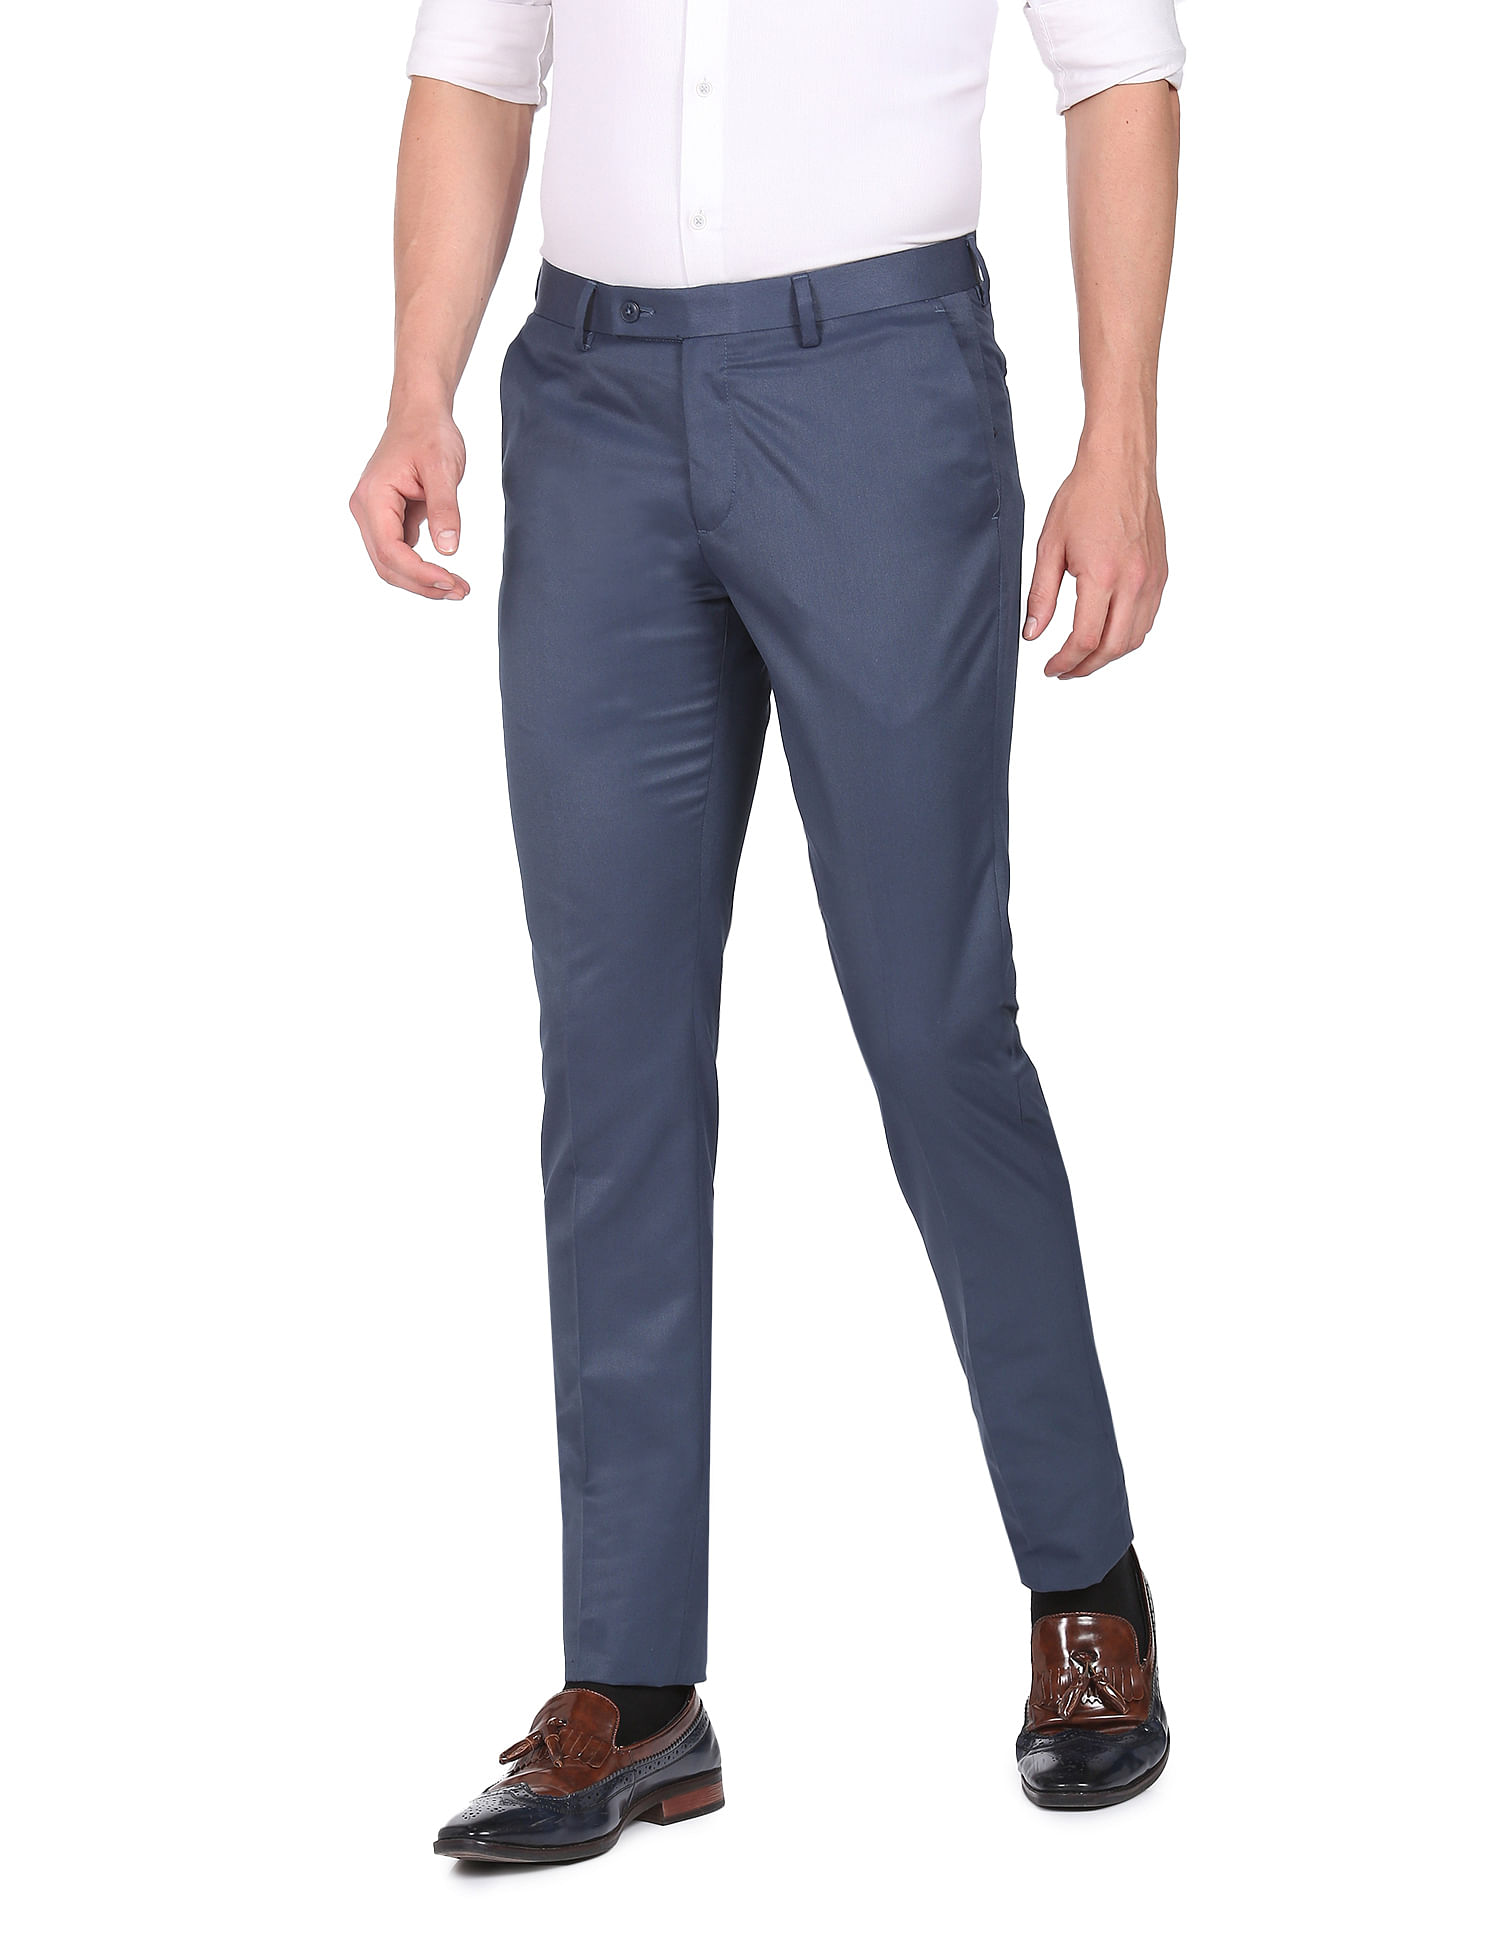 Blue Trousers - Buy Latest Blue Trousers Online in India | Myntra